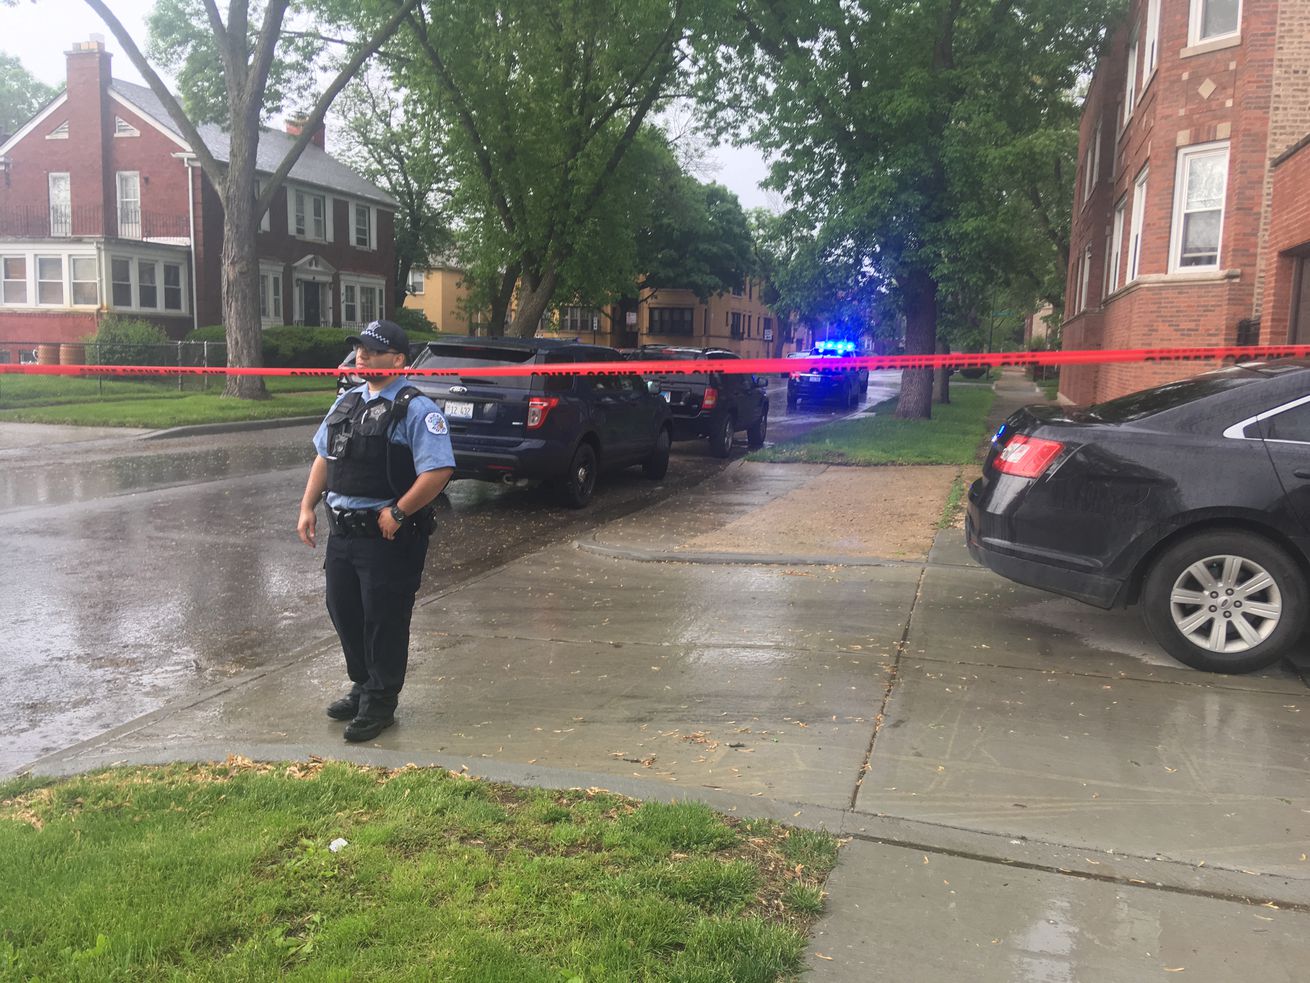 Police investigate after a man was critically wounded by Chicago police officers May 28 in the 8100 block of South Chappel Avenue.